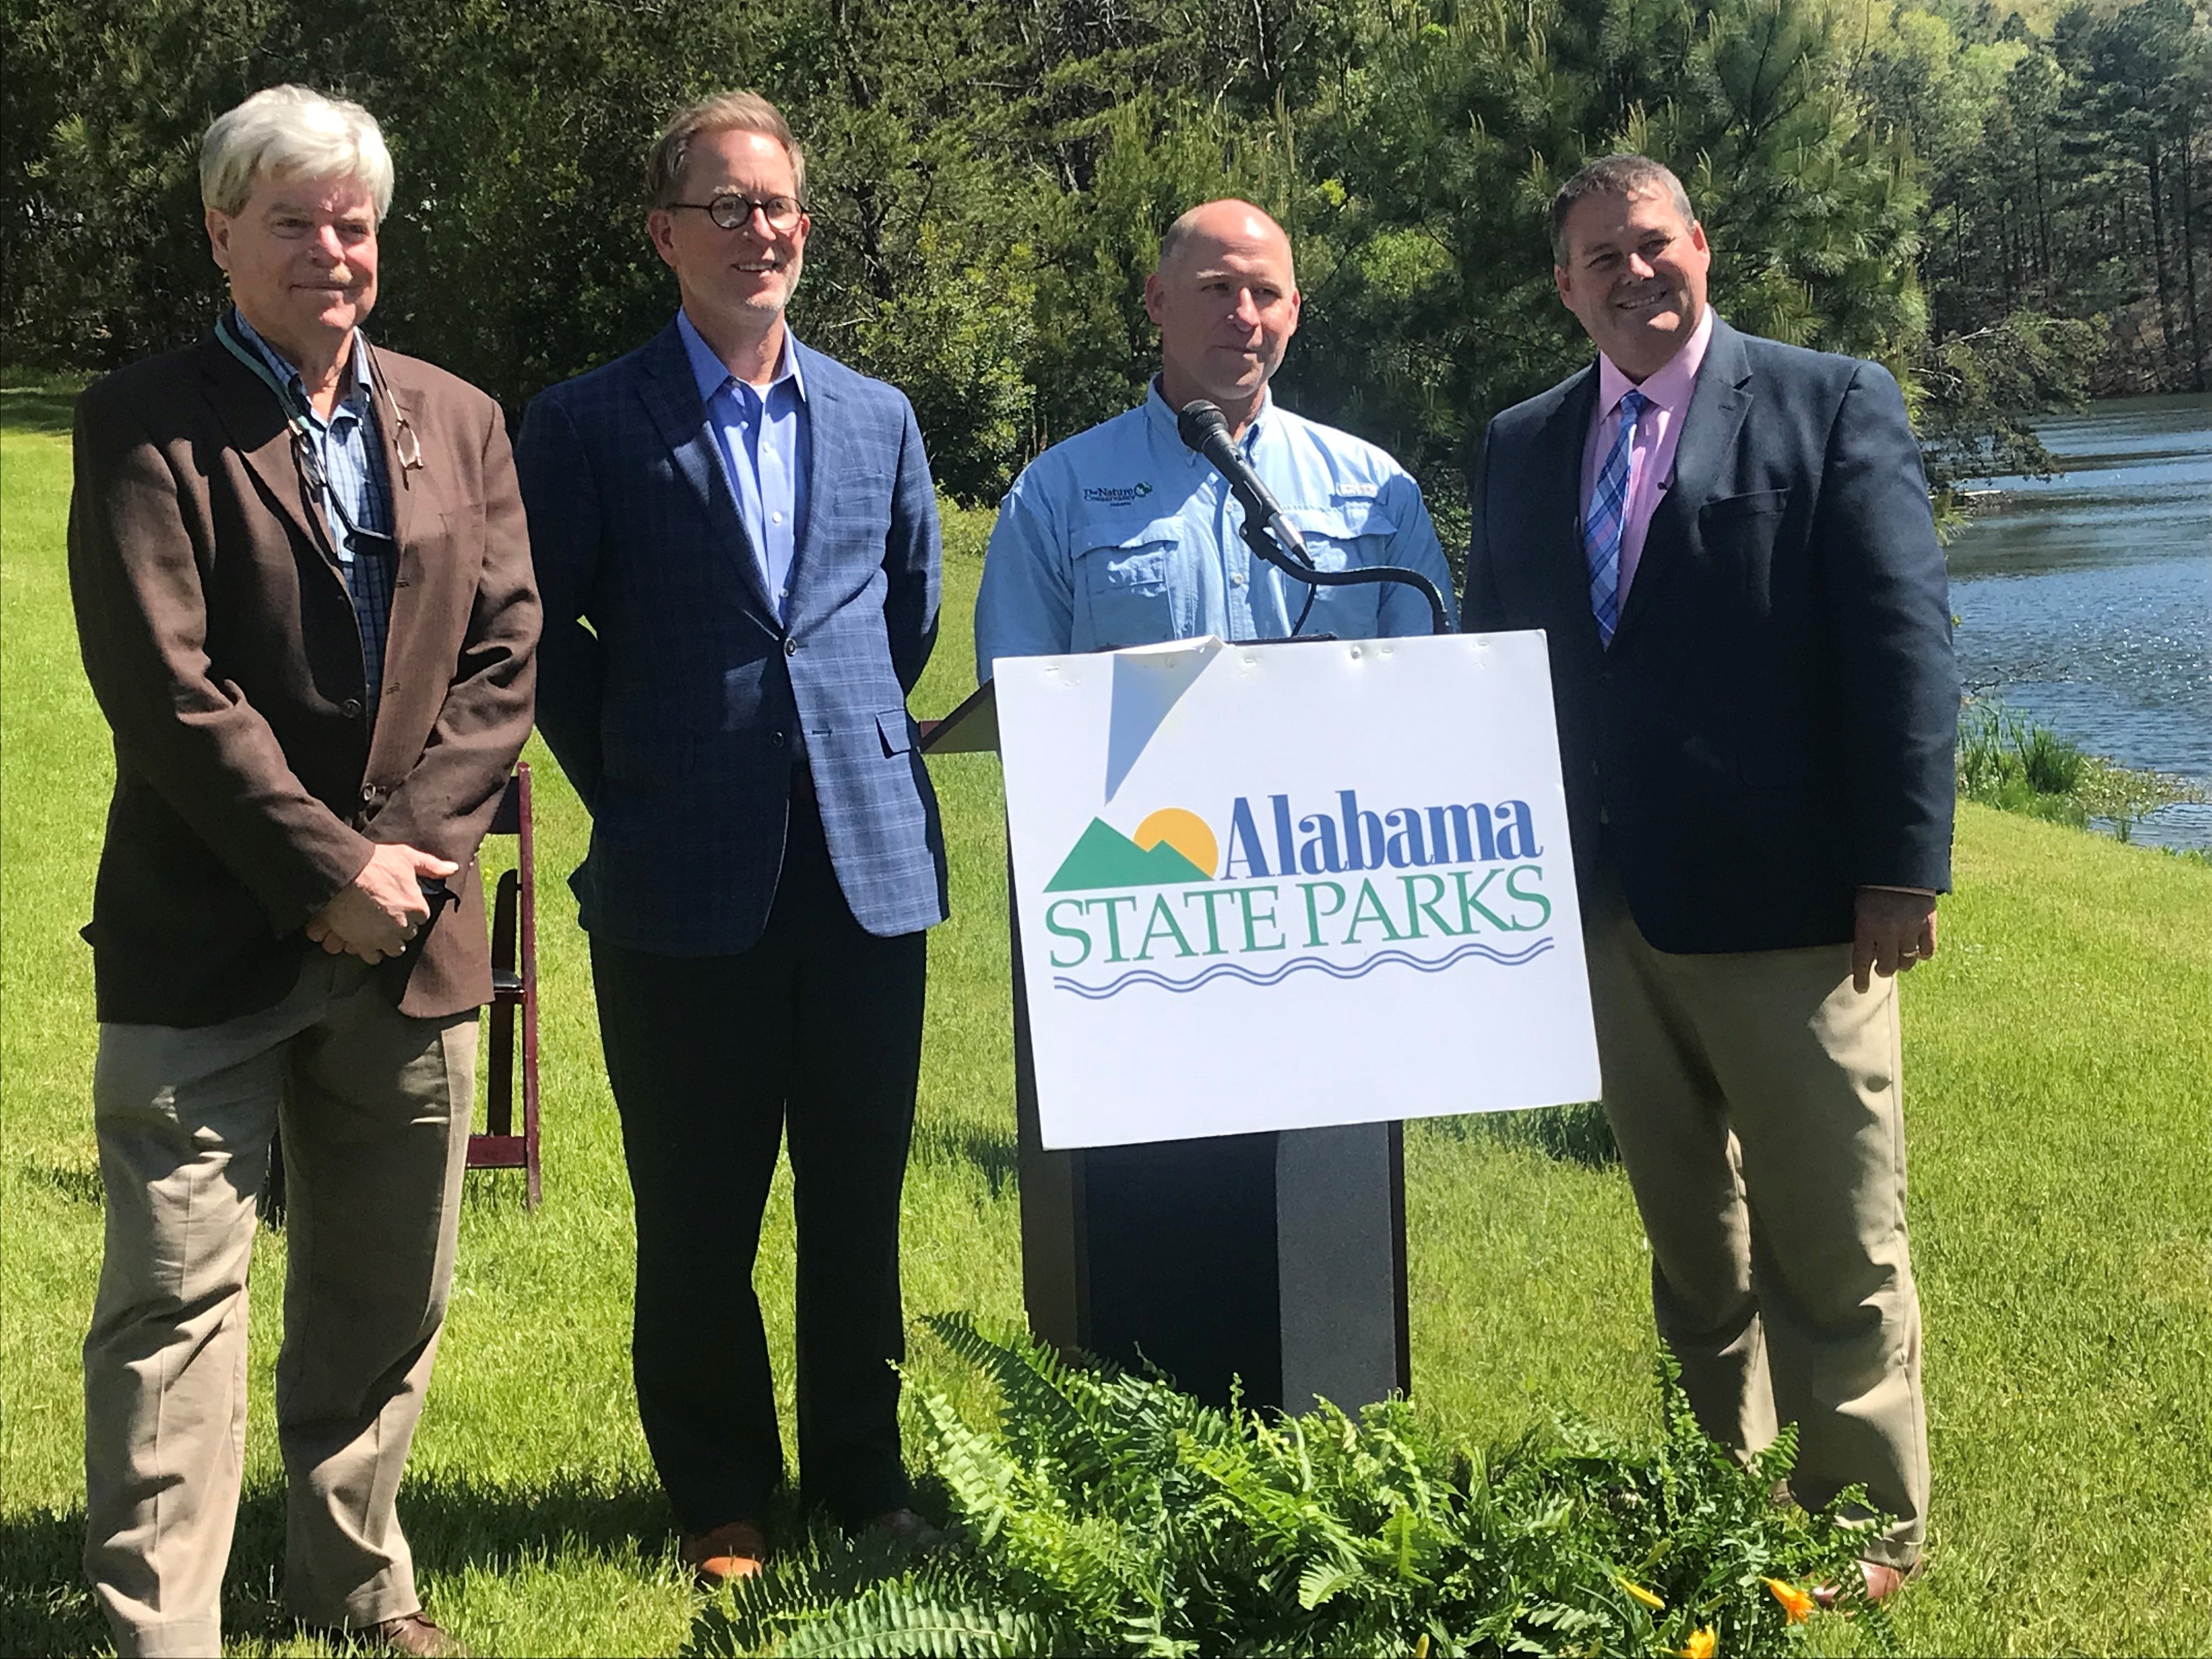 From left, Forever Wild Board Member Dr. James B. McClintock; David Walker, President and CEO of EBSCO Industries; Mitch Reid, Alabama State Director of The Nature Conservancy; and Chris Blankenship, Alabama Department of Conservation and Natural Resources Commissioner and Forever Wild Land Trust Chairman.